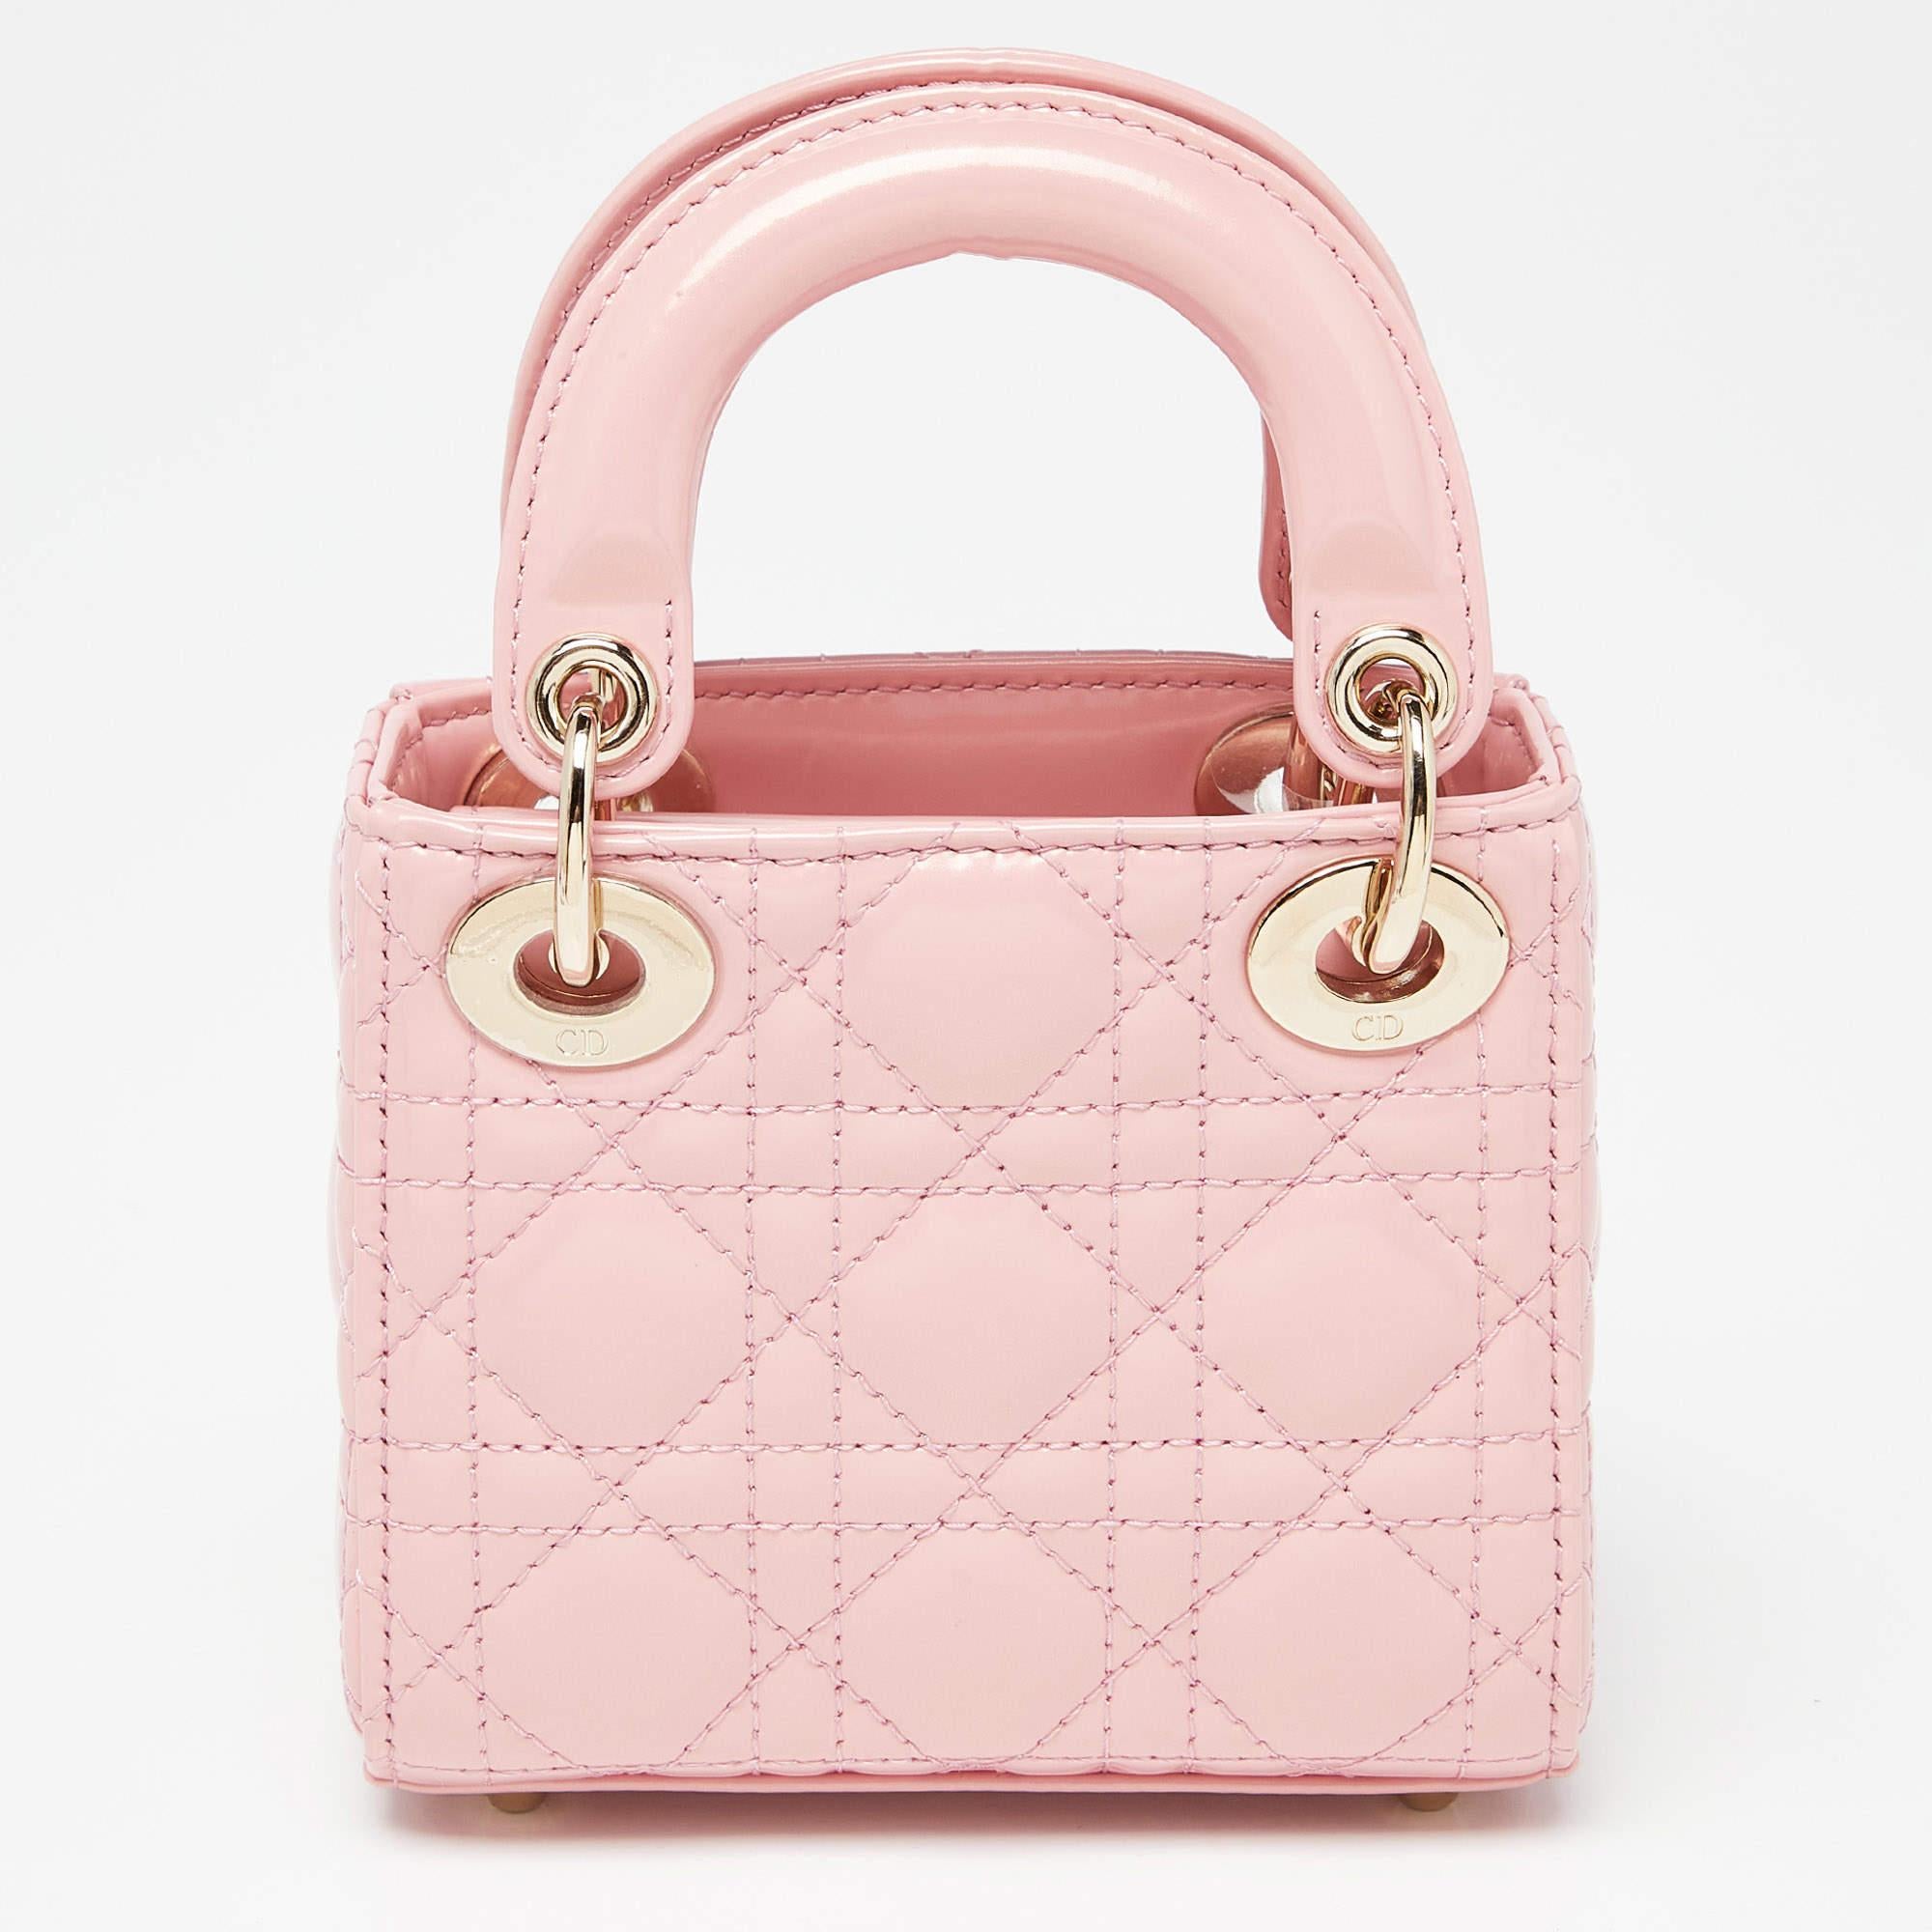 A timeless status and great design mark the Lady Dior tote. It is an iconic bag that people continue to invest in to this day. We have here this Micro Lady Dior in light pink. It's light, cute, and super pretty.


Includes: Original Dustbag,